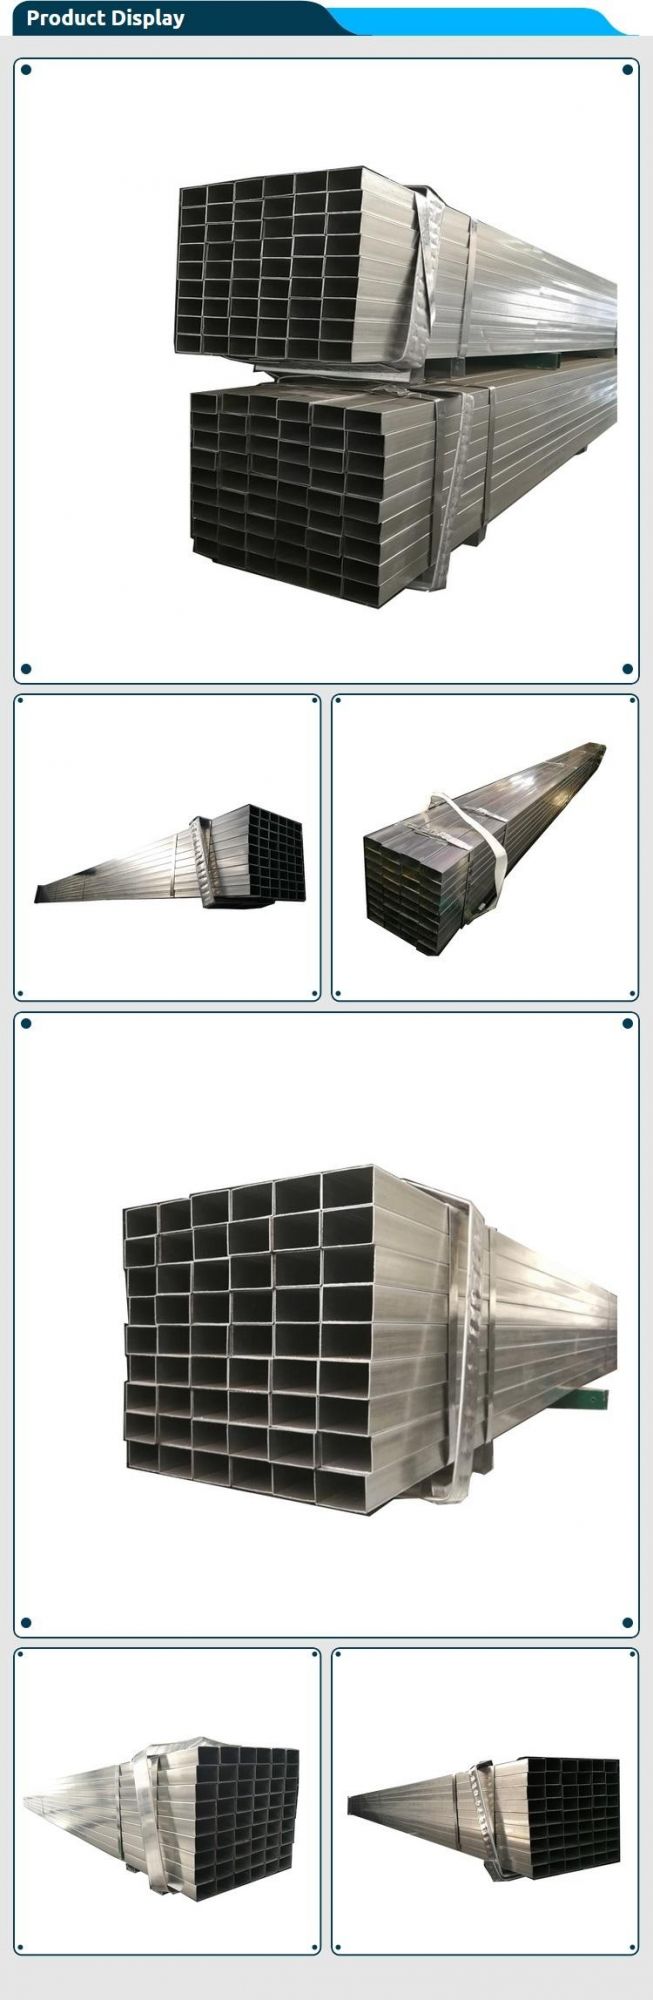 China Hot Dipped Galvanized Square Pipe/Pre Galvanized Square Rectangular Hollow Section /Shs and Rhs Tube